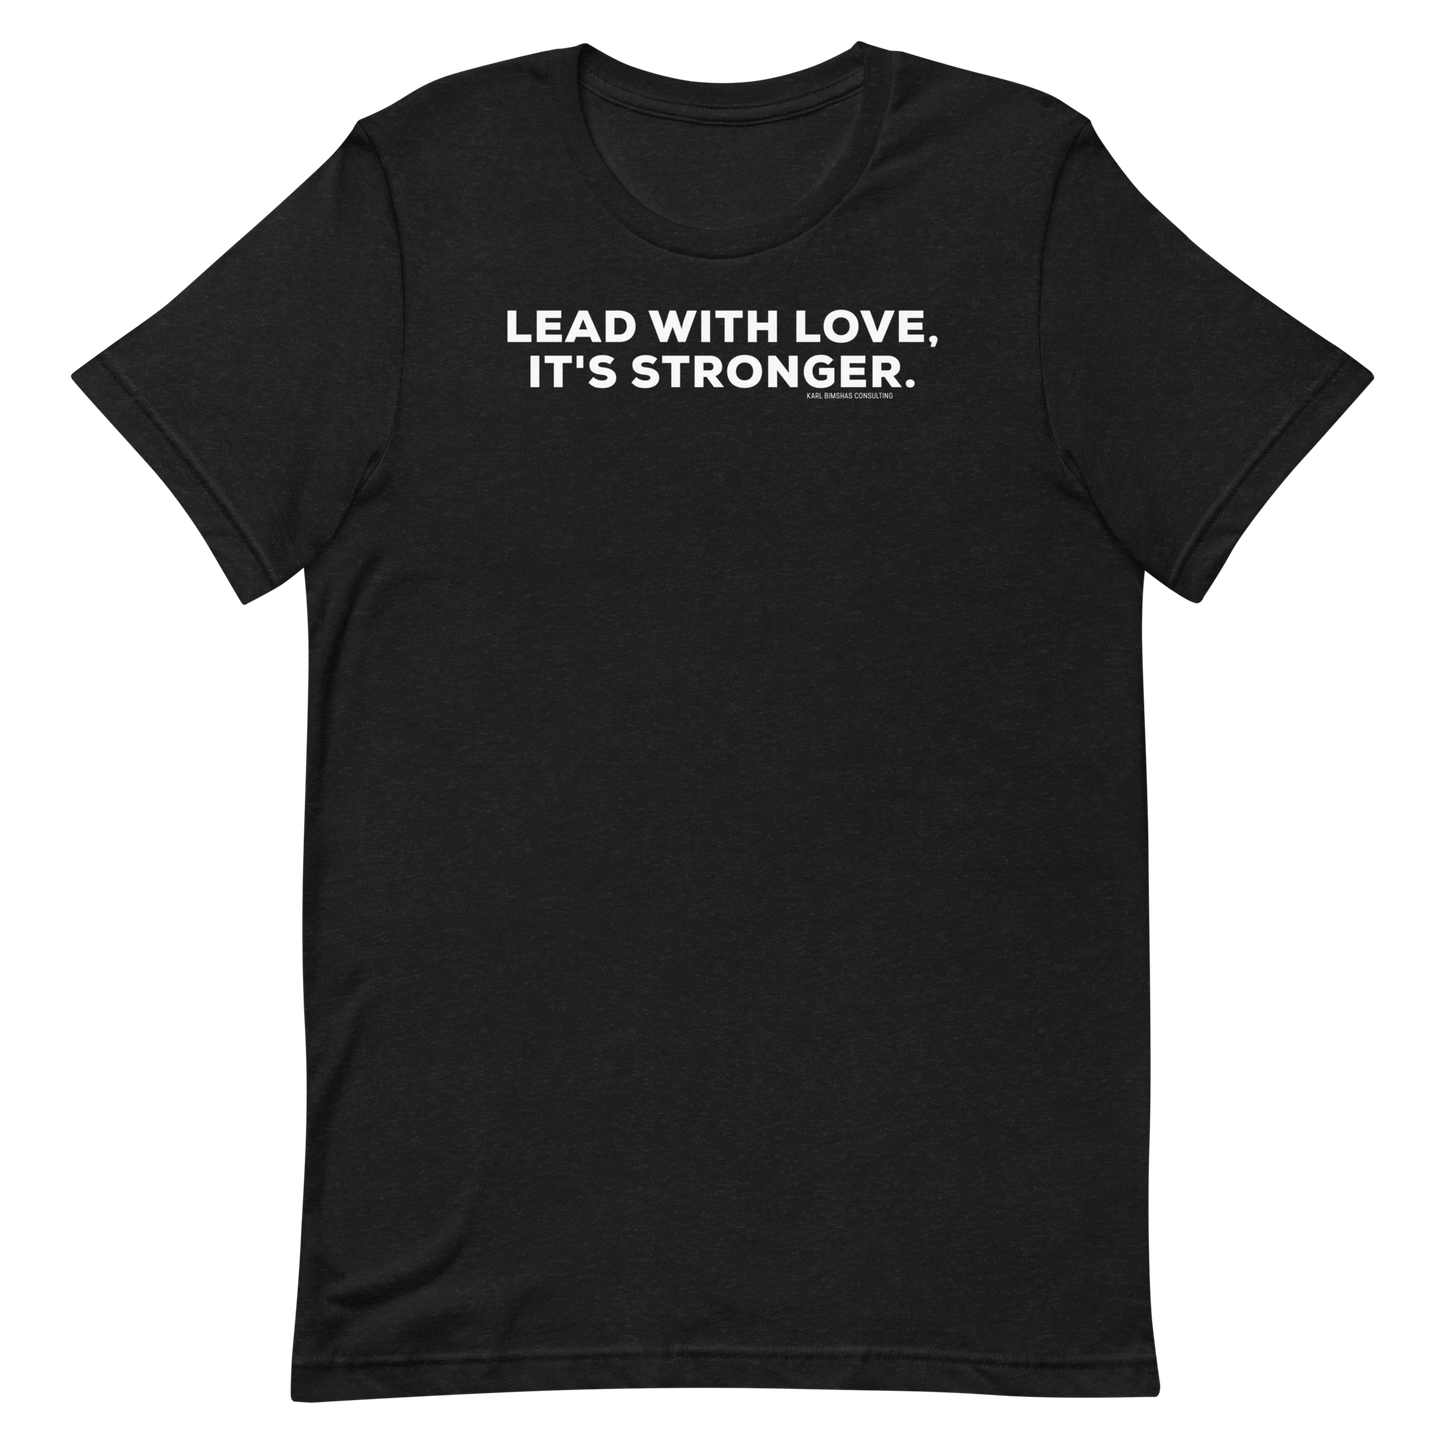 Lead With Love - Red or Black